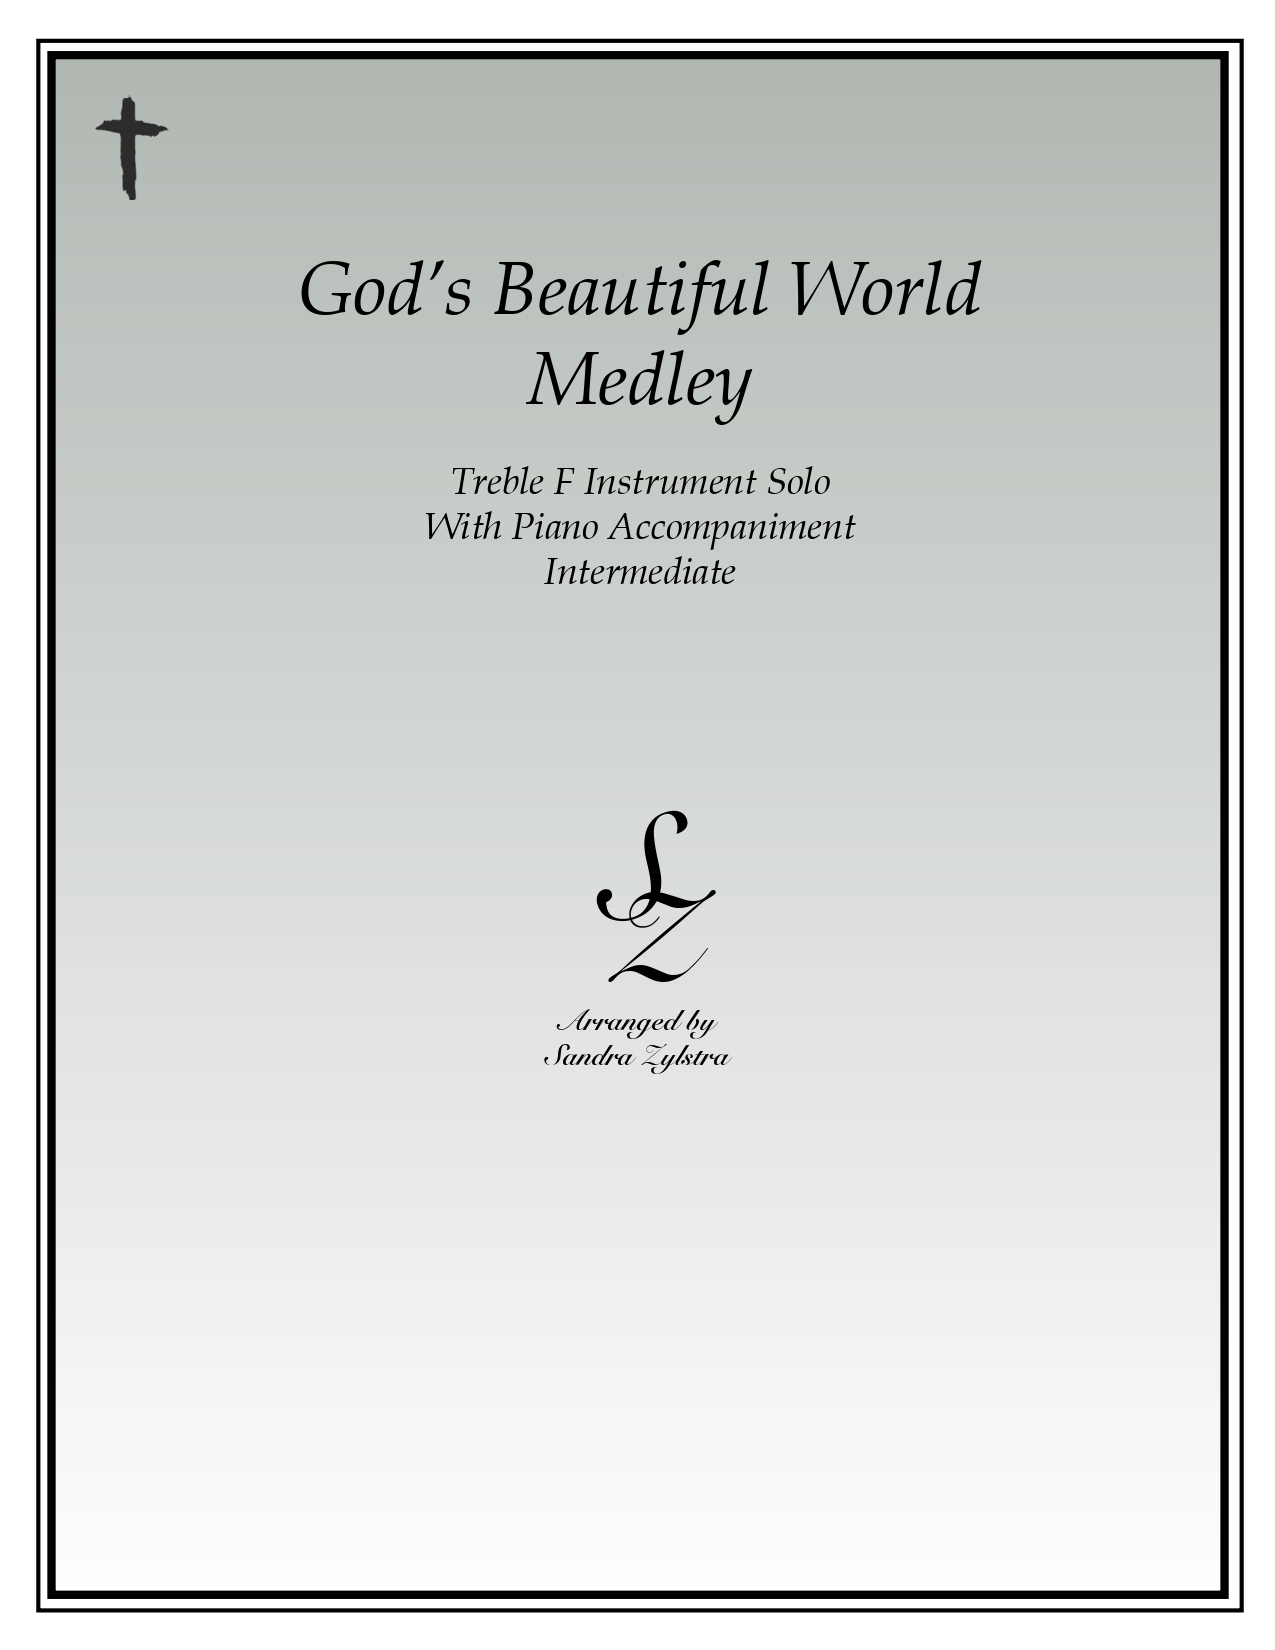 Gods Beautiful World Medley F instrument solo part cover page 00011